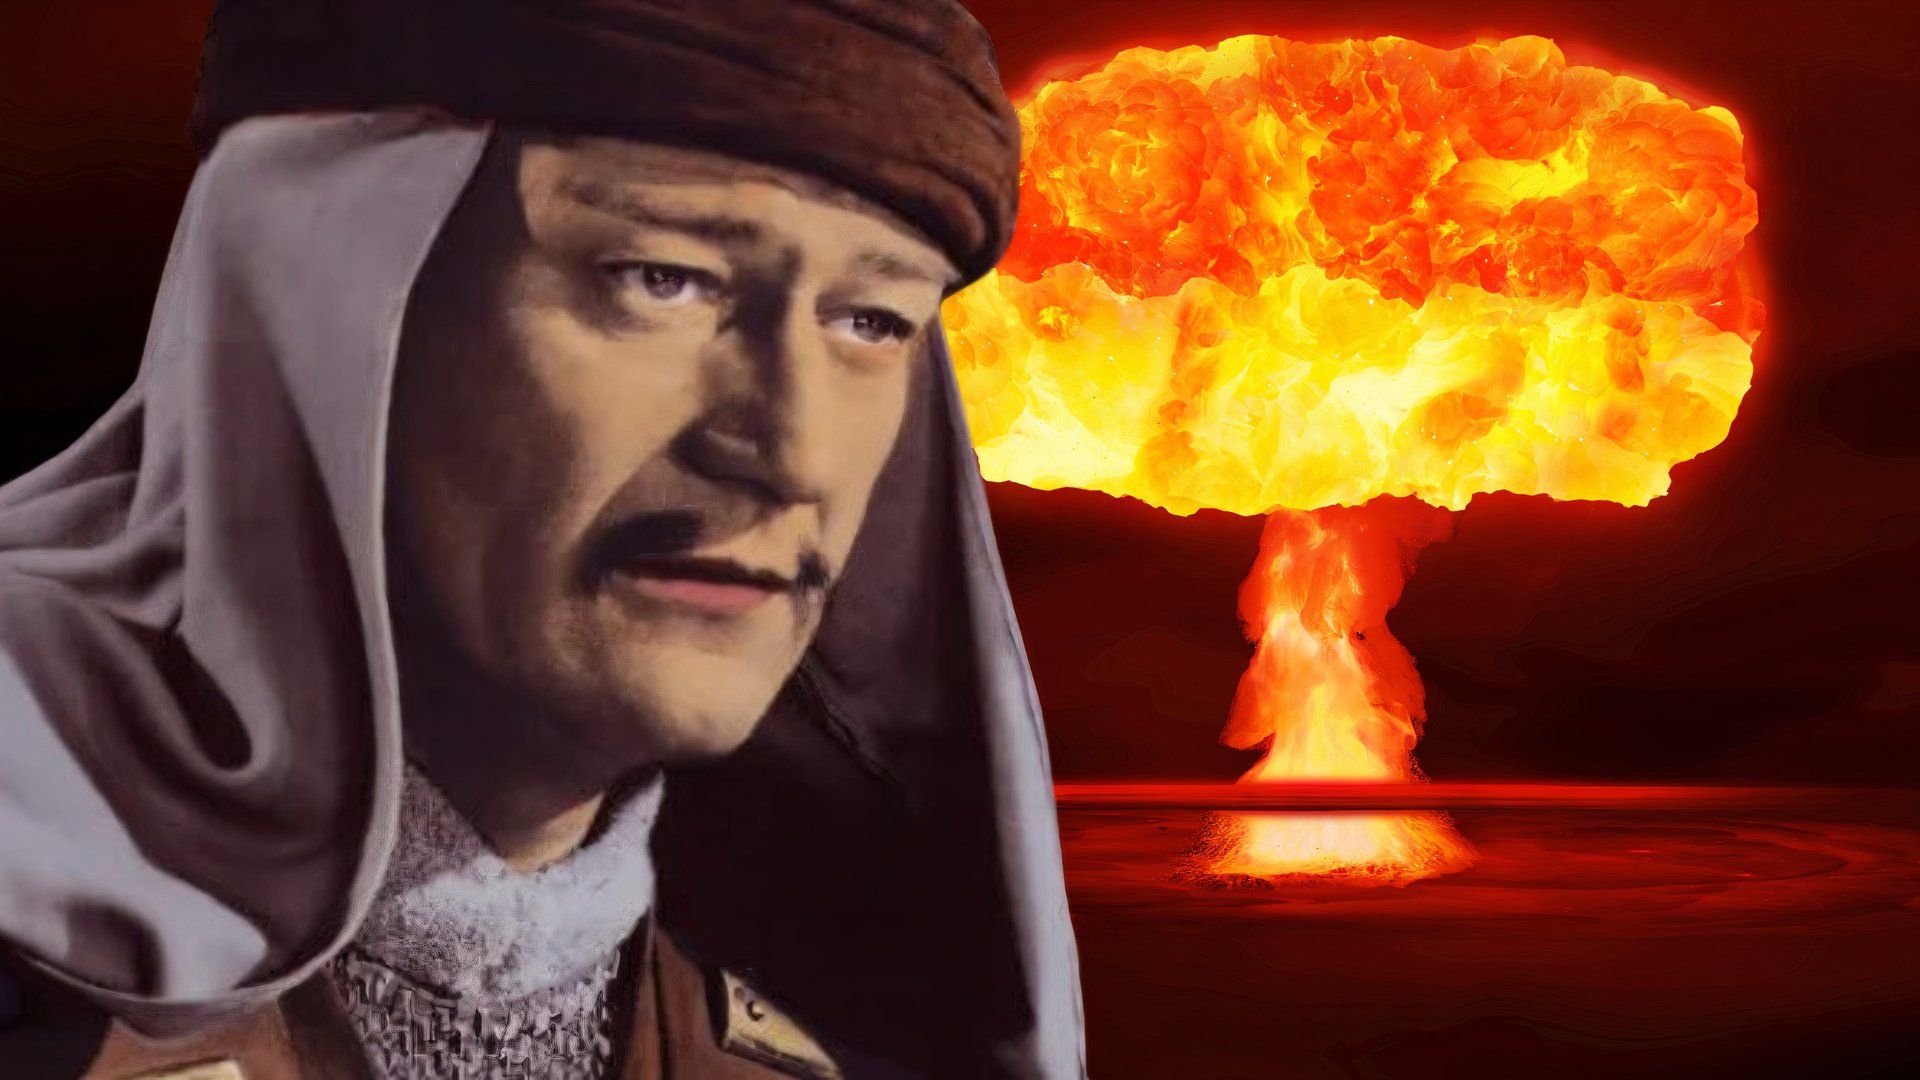 John Wayne as Genghis Khan in The Conqueror next to an atom bomb explosion in Hollywood Fallout documentary